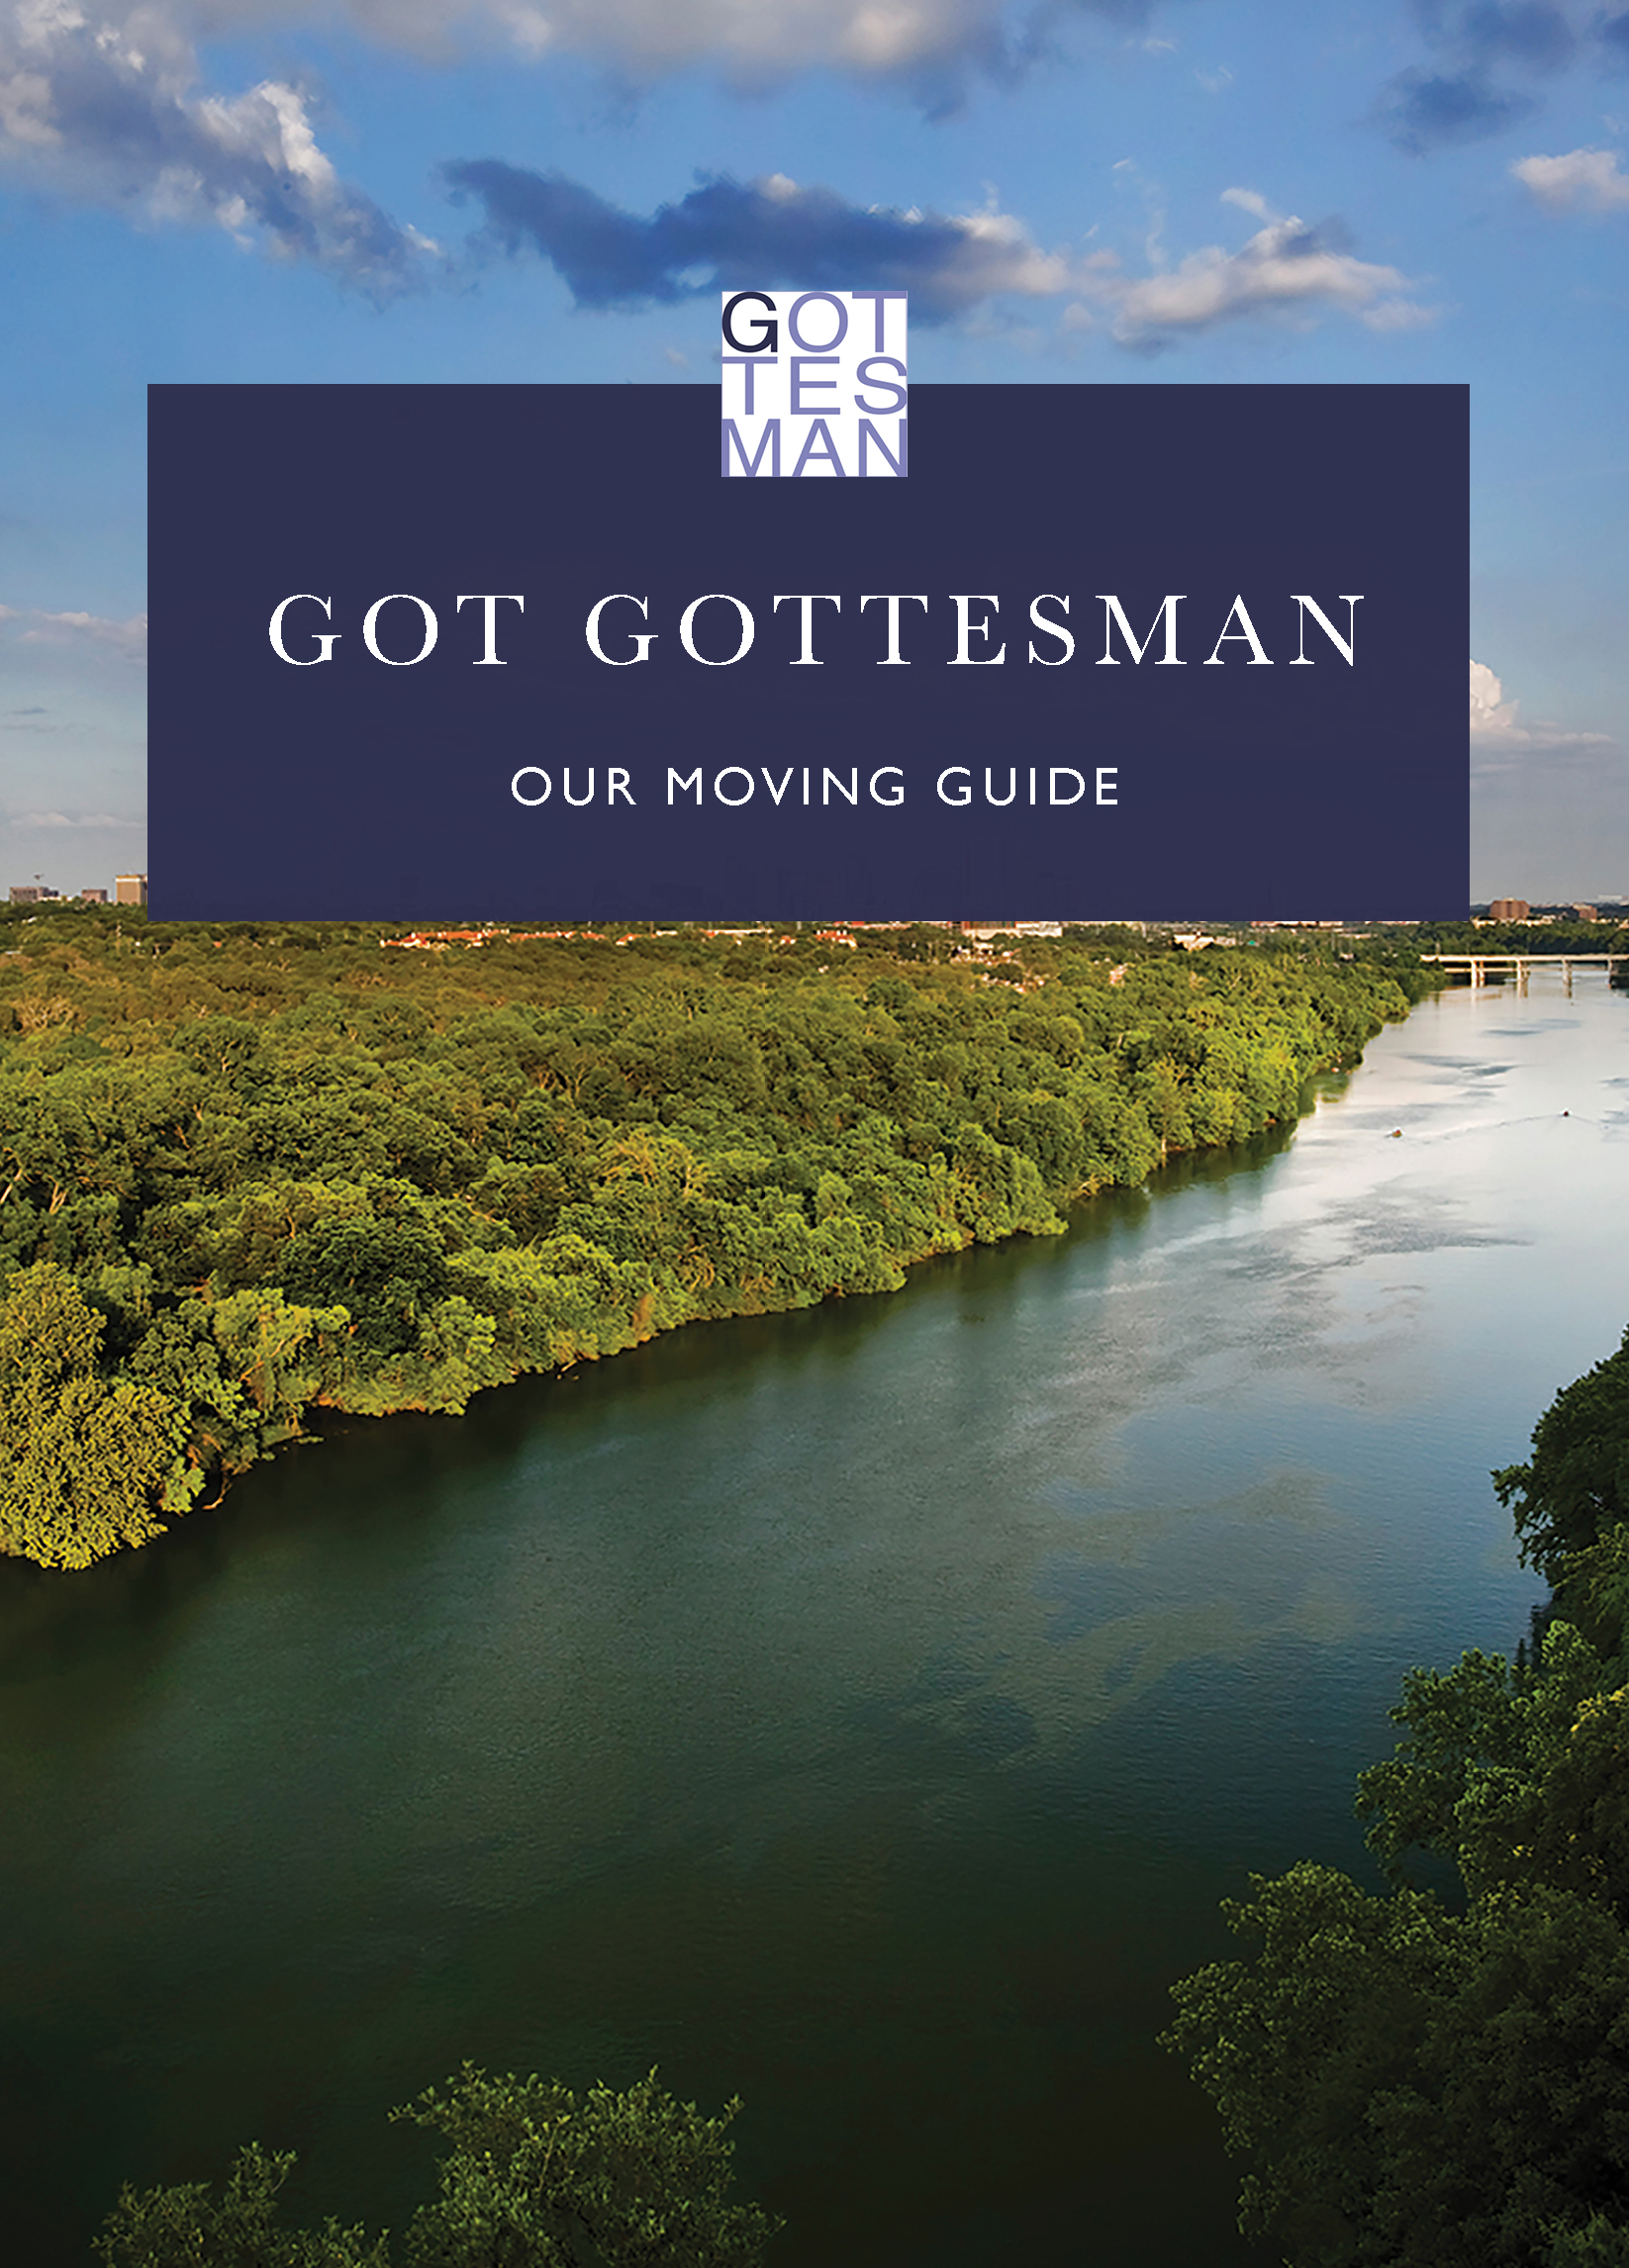 "Got Gottesman: Our Moving Guide"